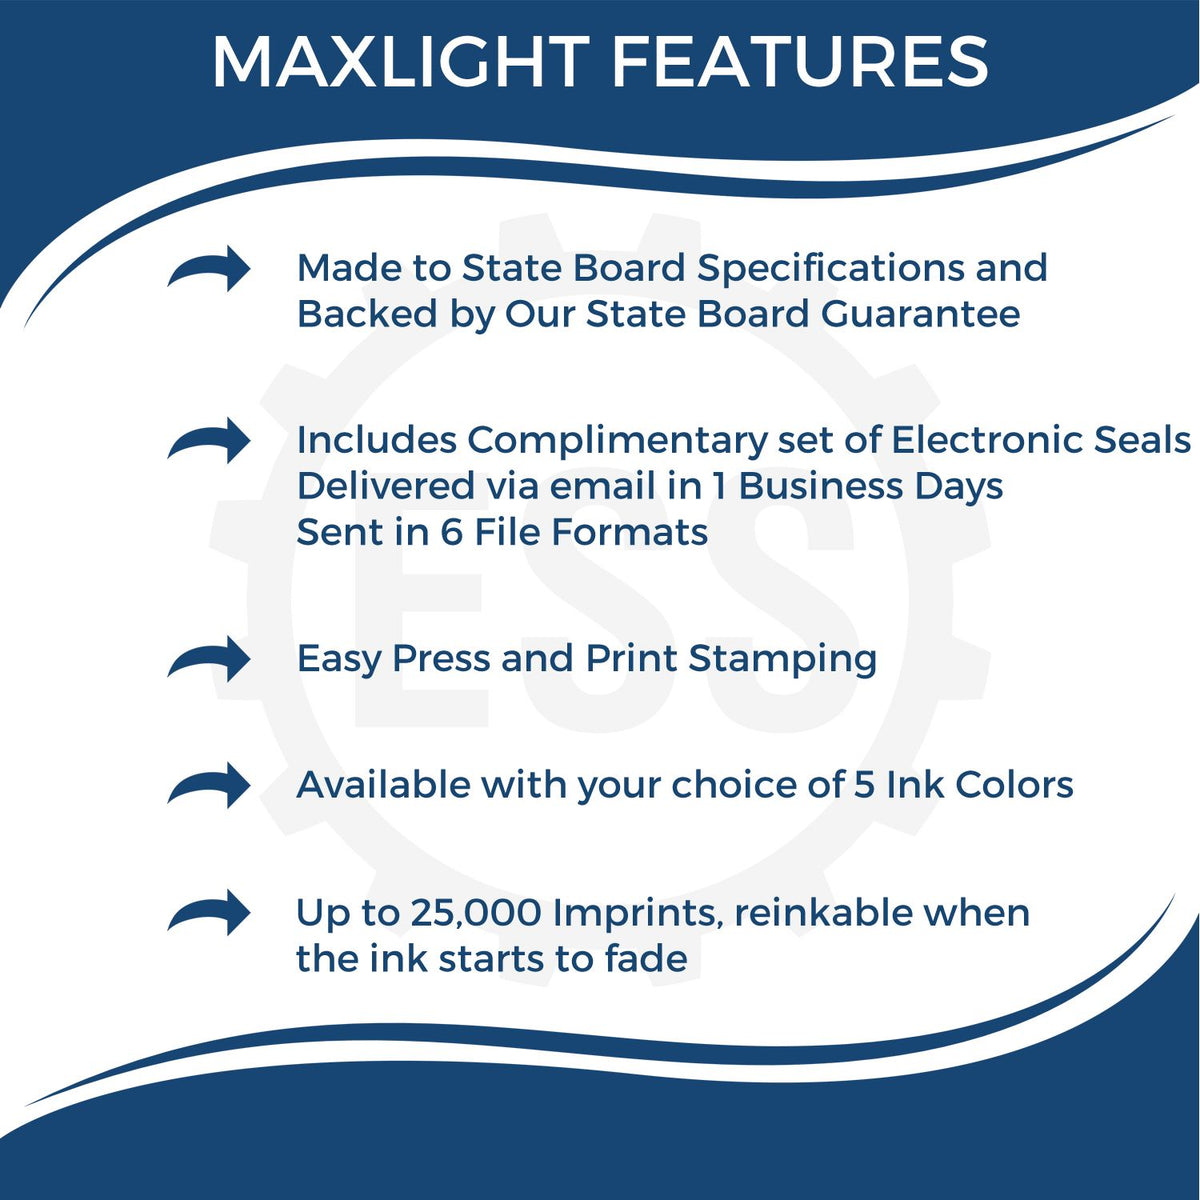 A picture of an infographic highlighting the selling points for the Premium MaxLight Pre-Inked Connecticut Landscape Architectural Stamp